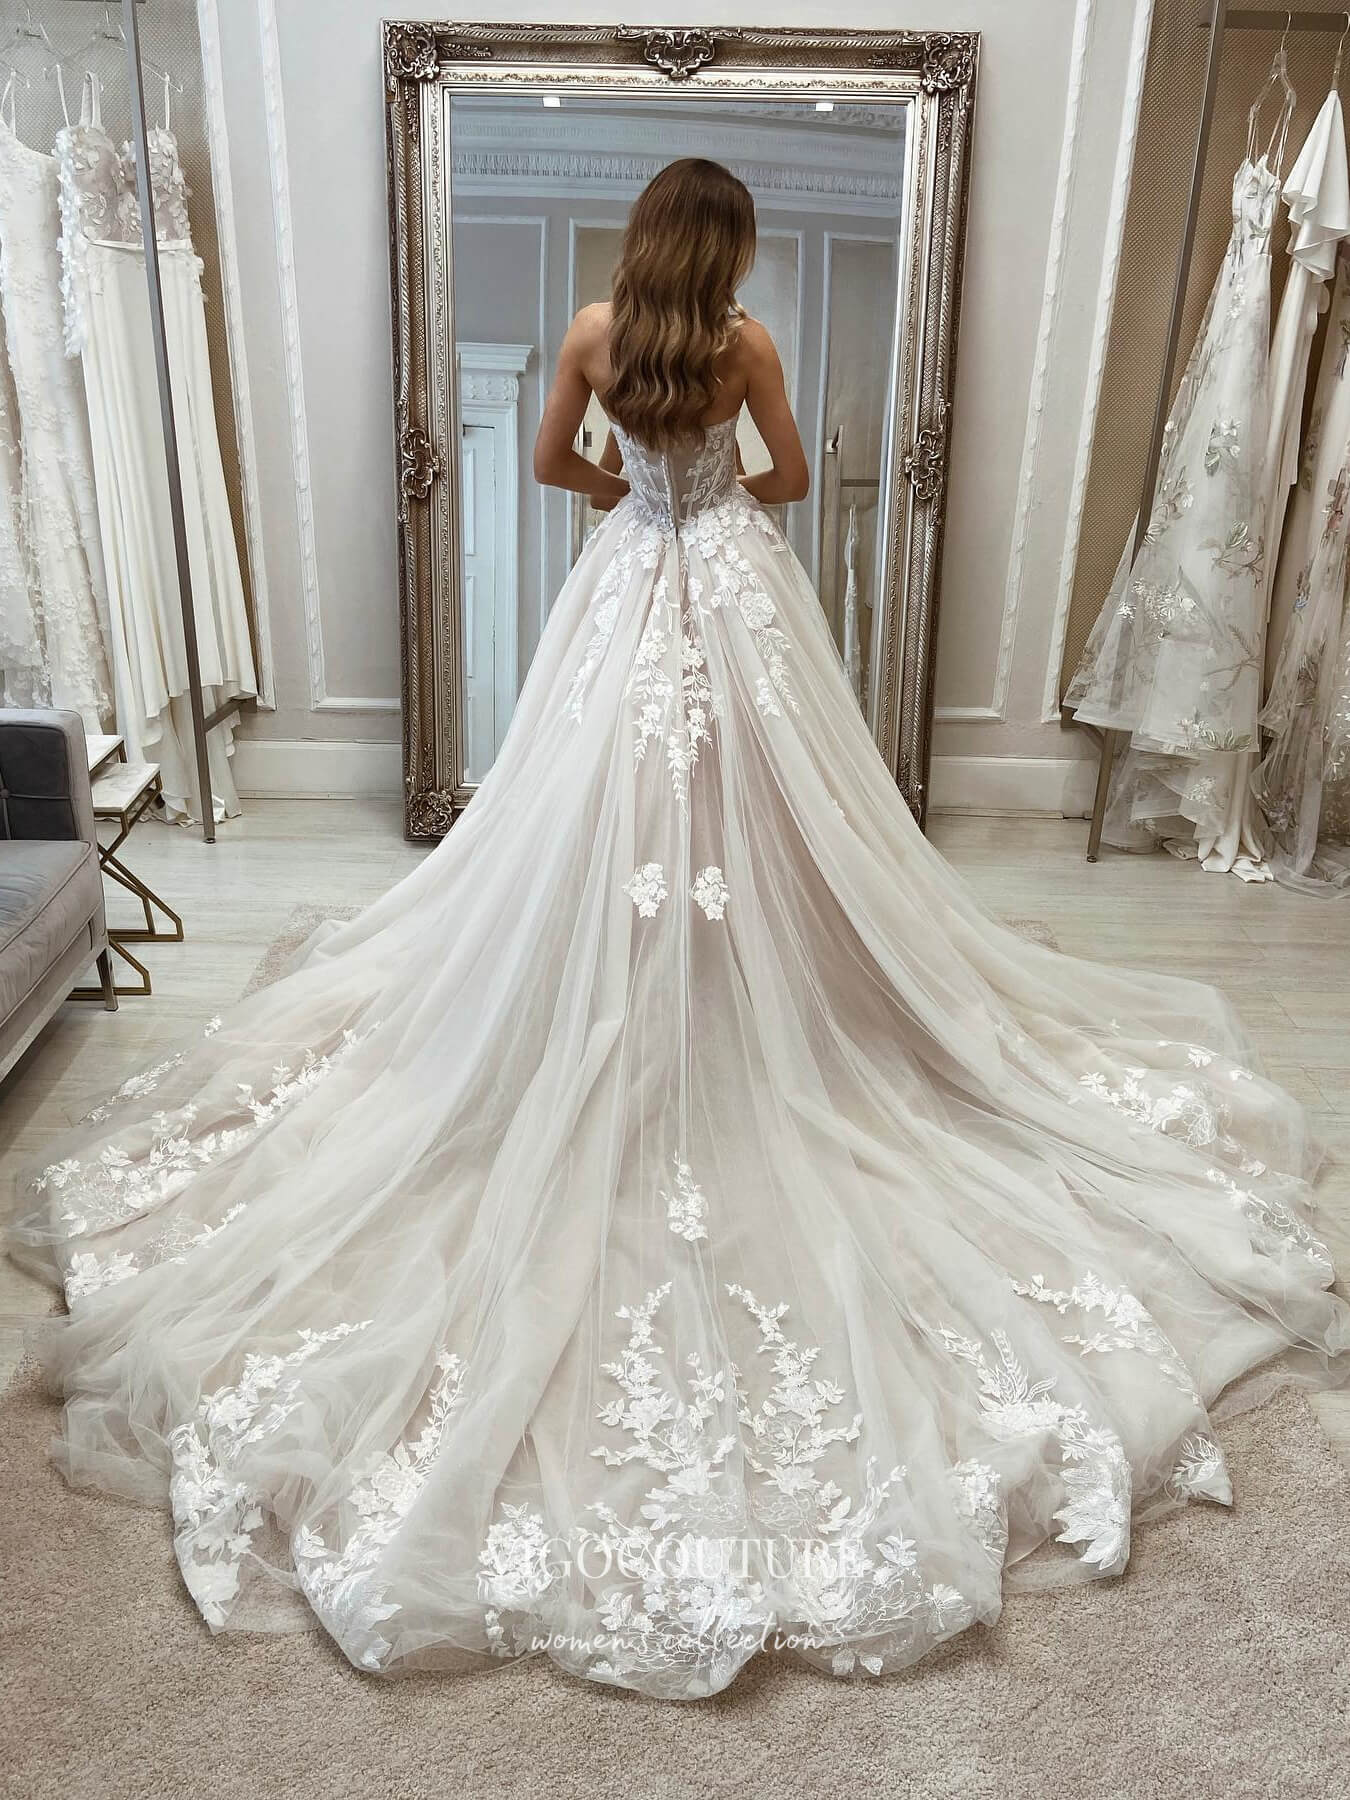 vigocouture-Strapless Lace Applique Wedding Dresses With Cathedral Train W0023-Wedding Dresses-vigocouture-As Pictured-US2-